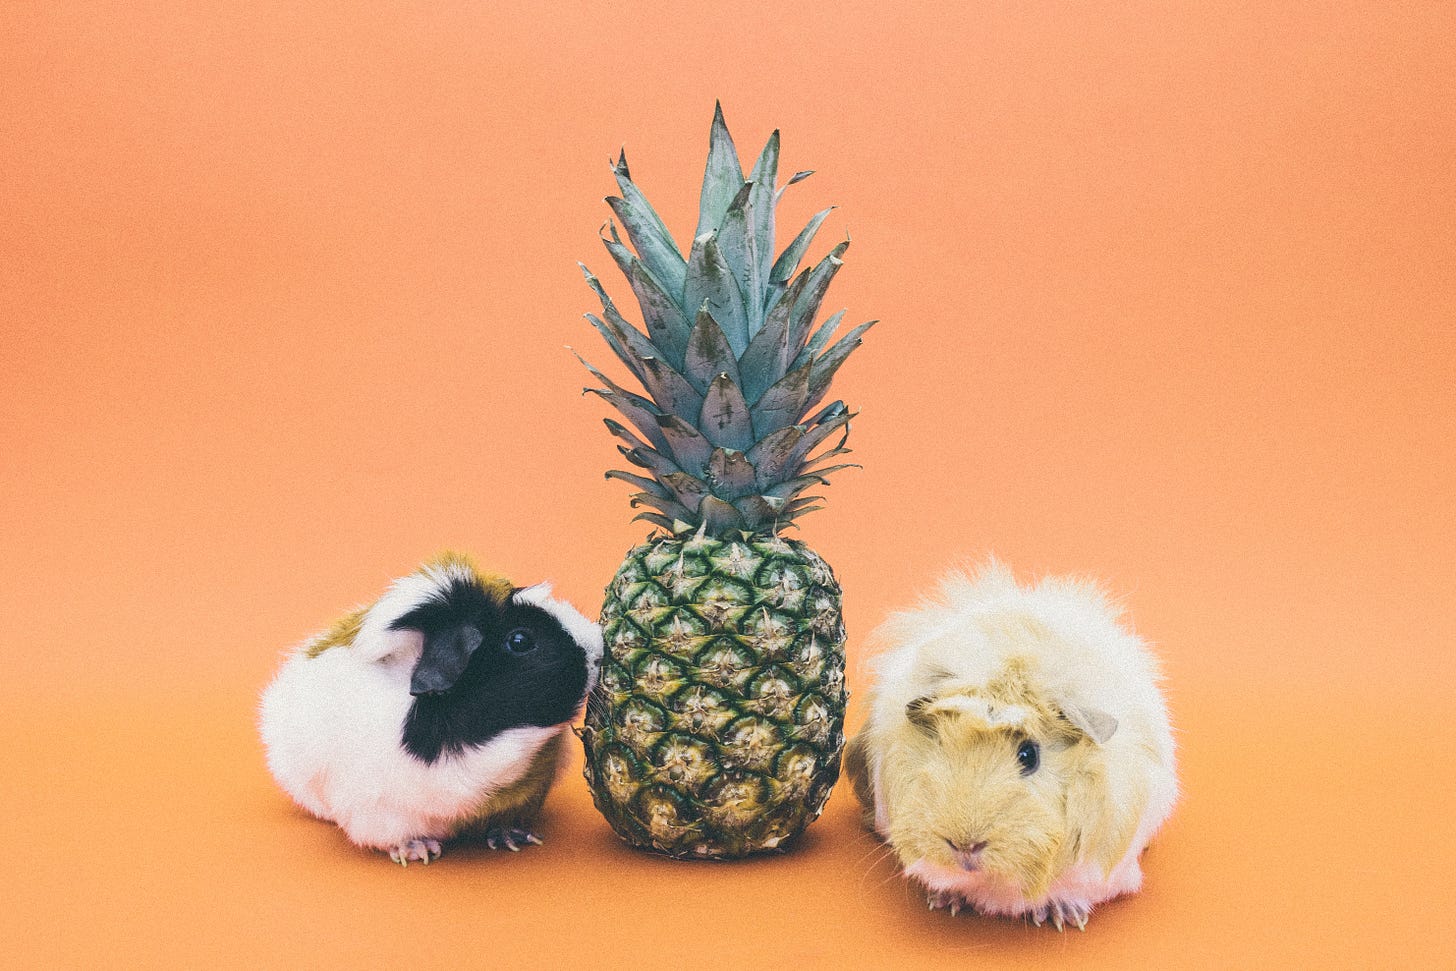 A pineapple and two guinea pigs posing together and looking cute